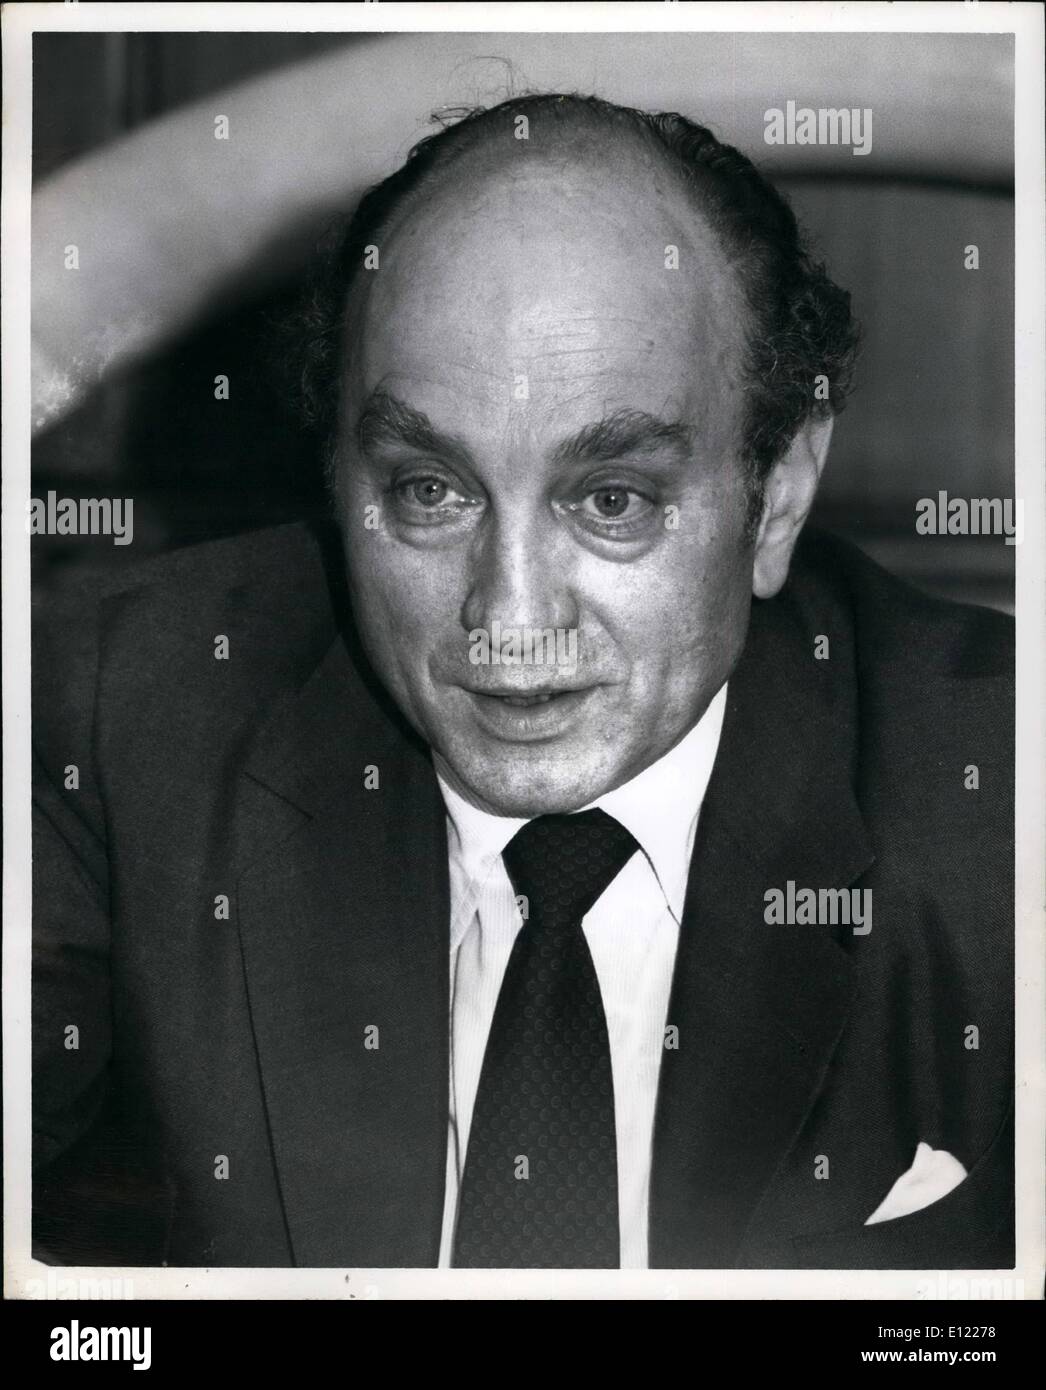 Feb. 02, 1982 - The Pierre Hotel, New York City: Federal Minister Of Economics For The Federal Republic Of Germany, His Excellency Dr. Otto Count Lambsdorff Addressed The Foreign Policy Association Today At The Pierre Hotel In New York City. Photo shows Dr. Otto Count Lambsdorff. Stock Photo